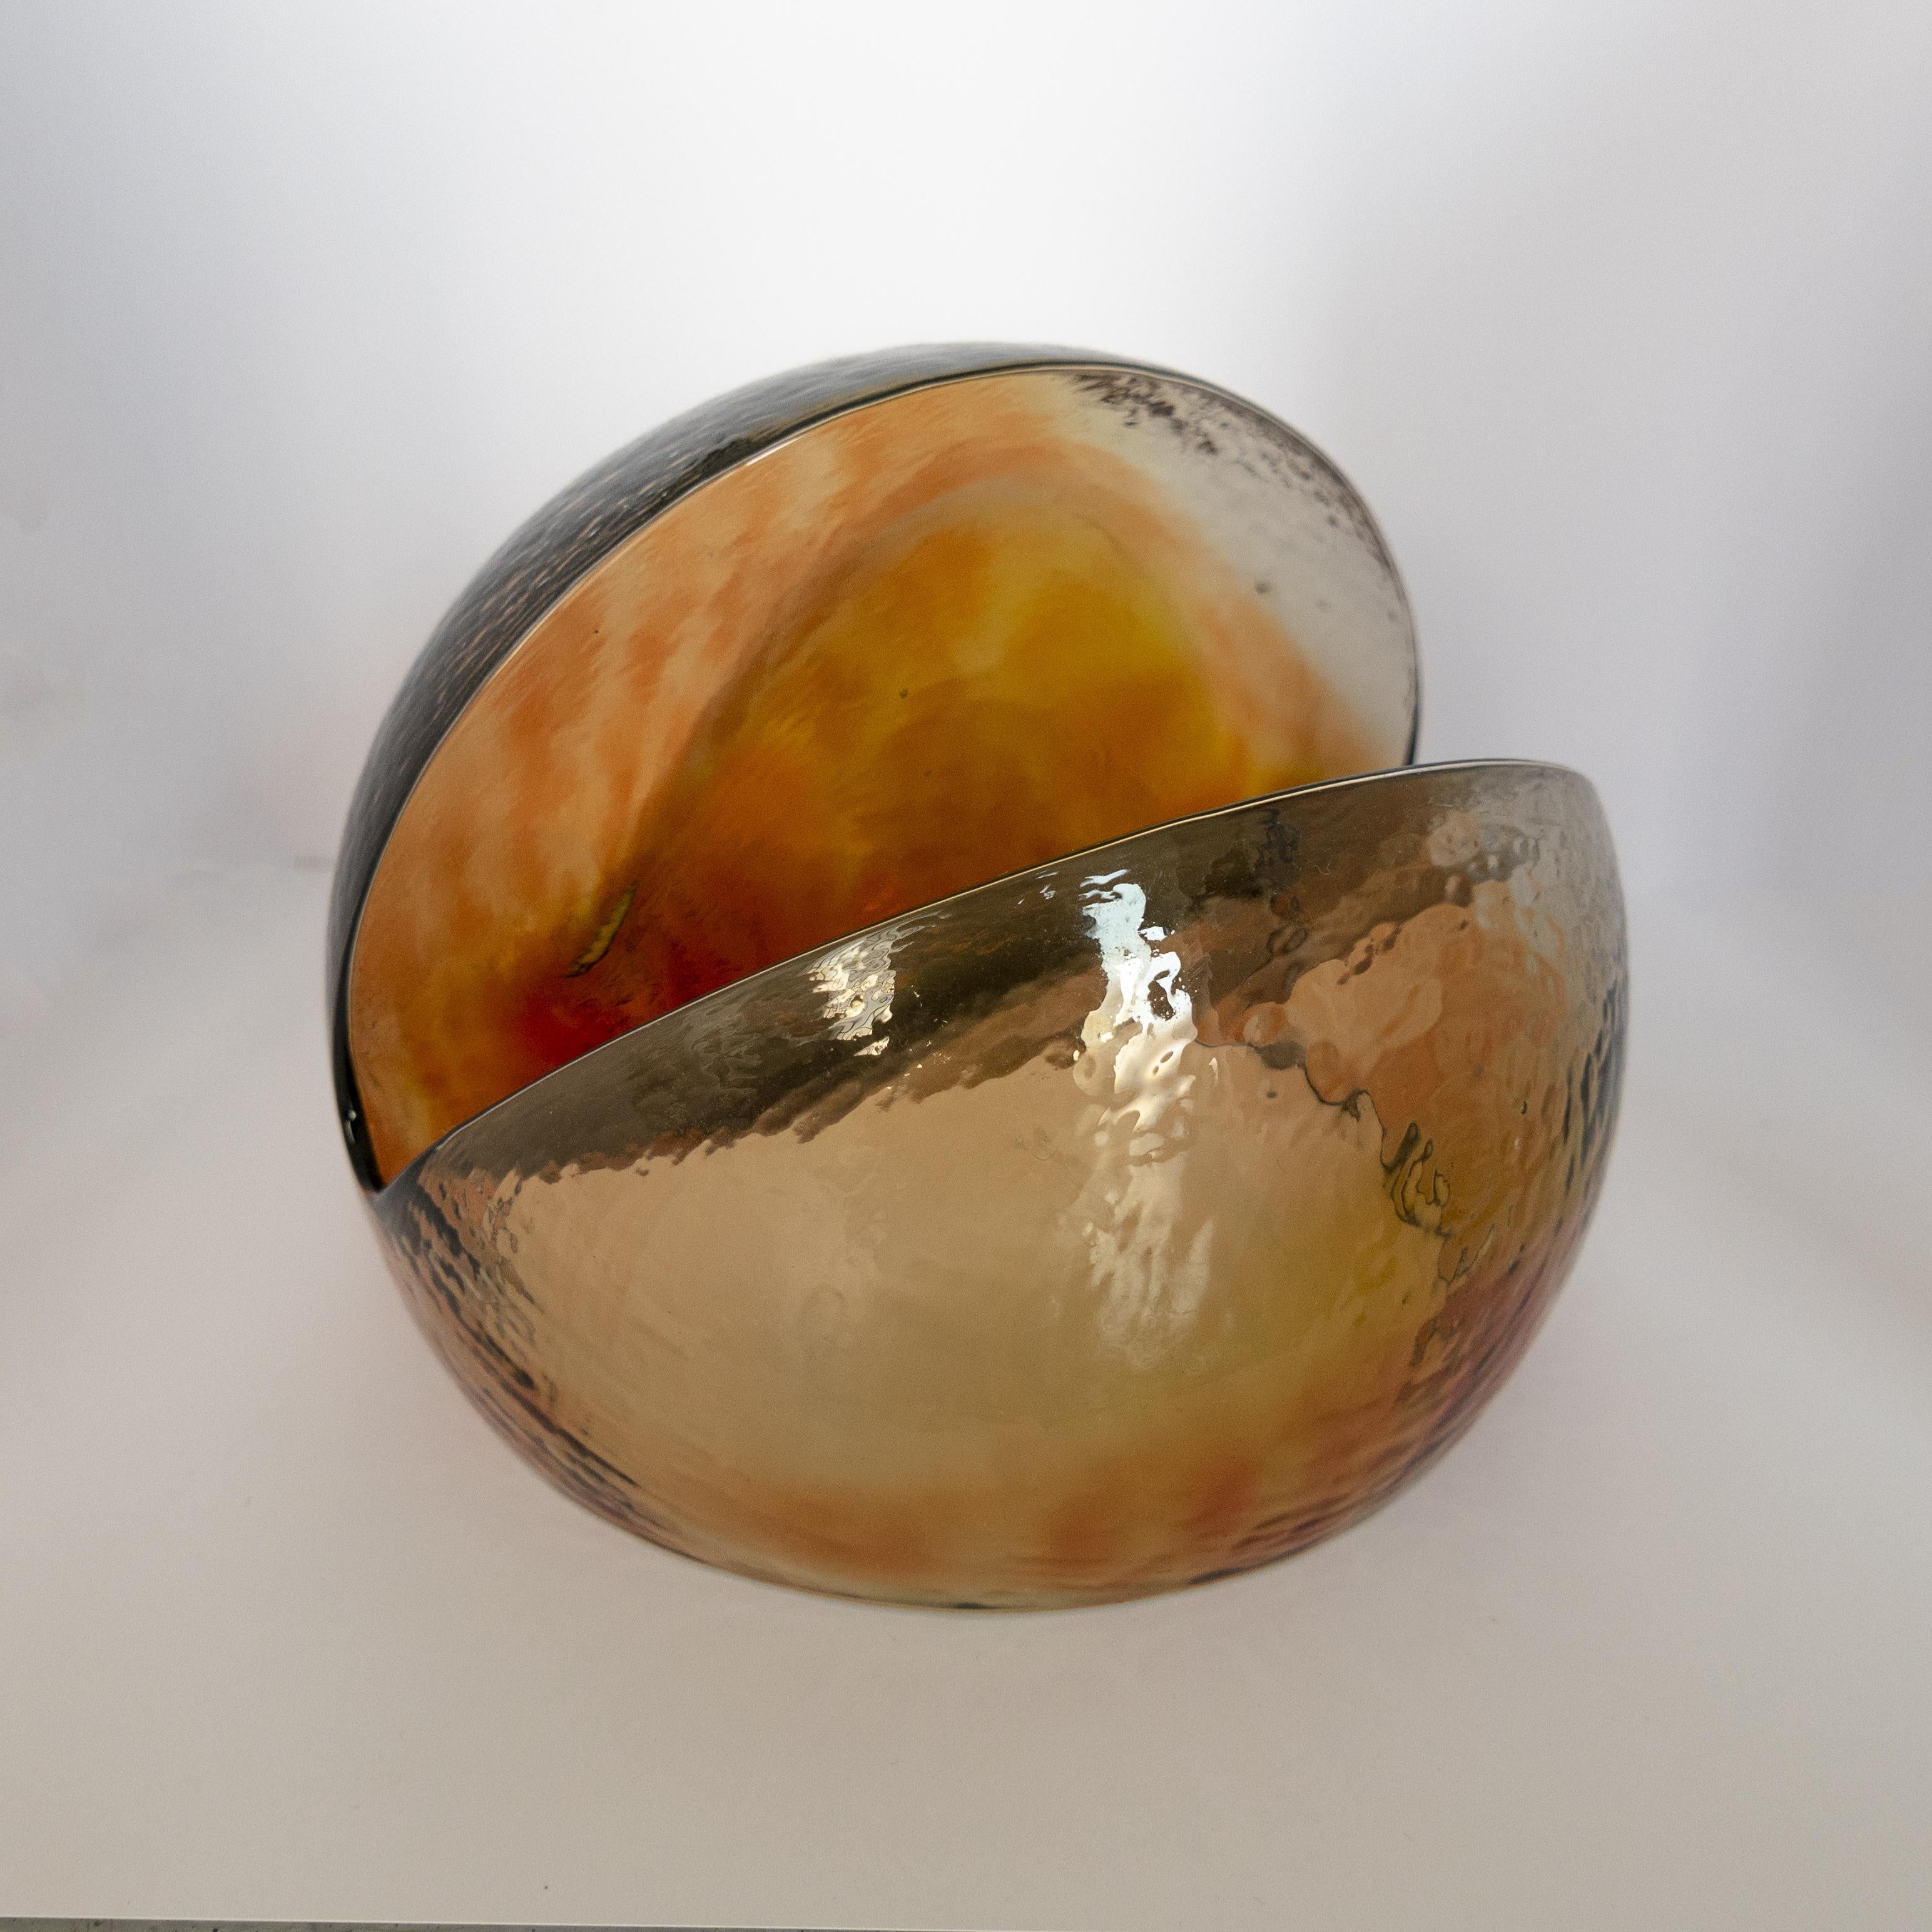 Designed in the early 1980s by Toni Zuccheri during his collaboration with VeArt, this sculpture perfectly represente the kind of experimentations that the famed glass designer was creating in those years. Other examples of his personal style can be